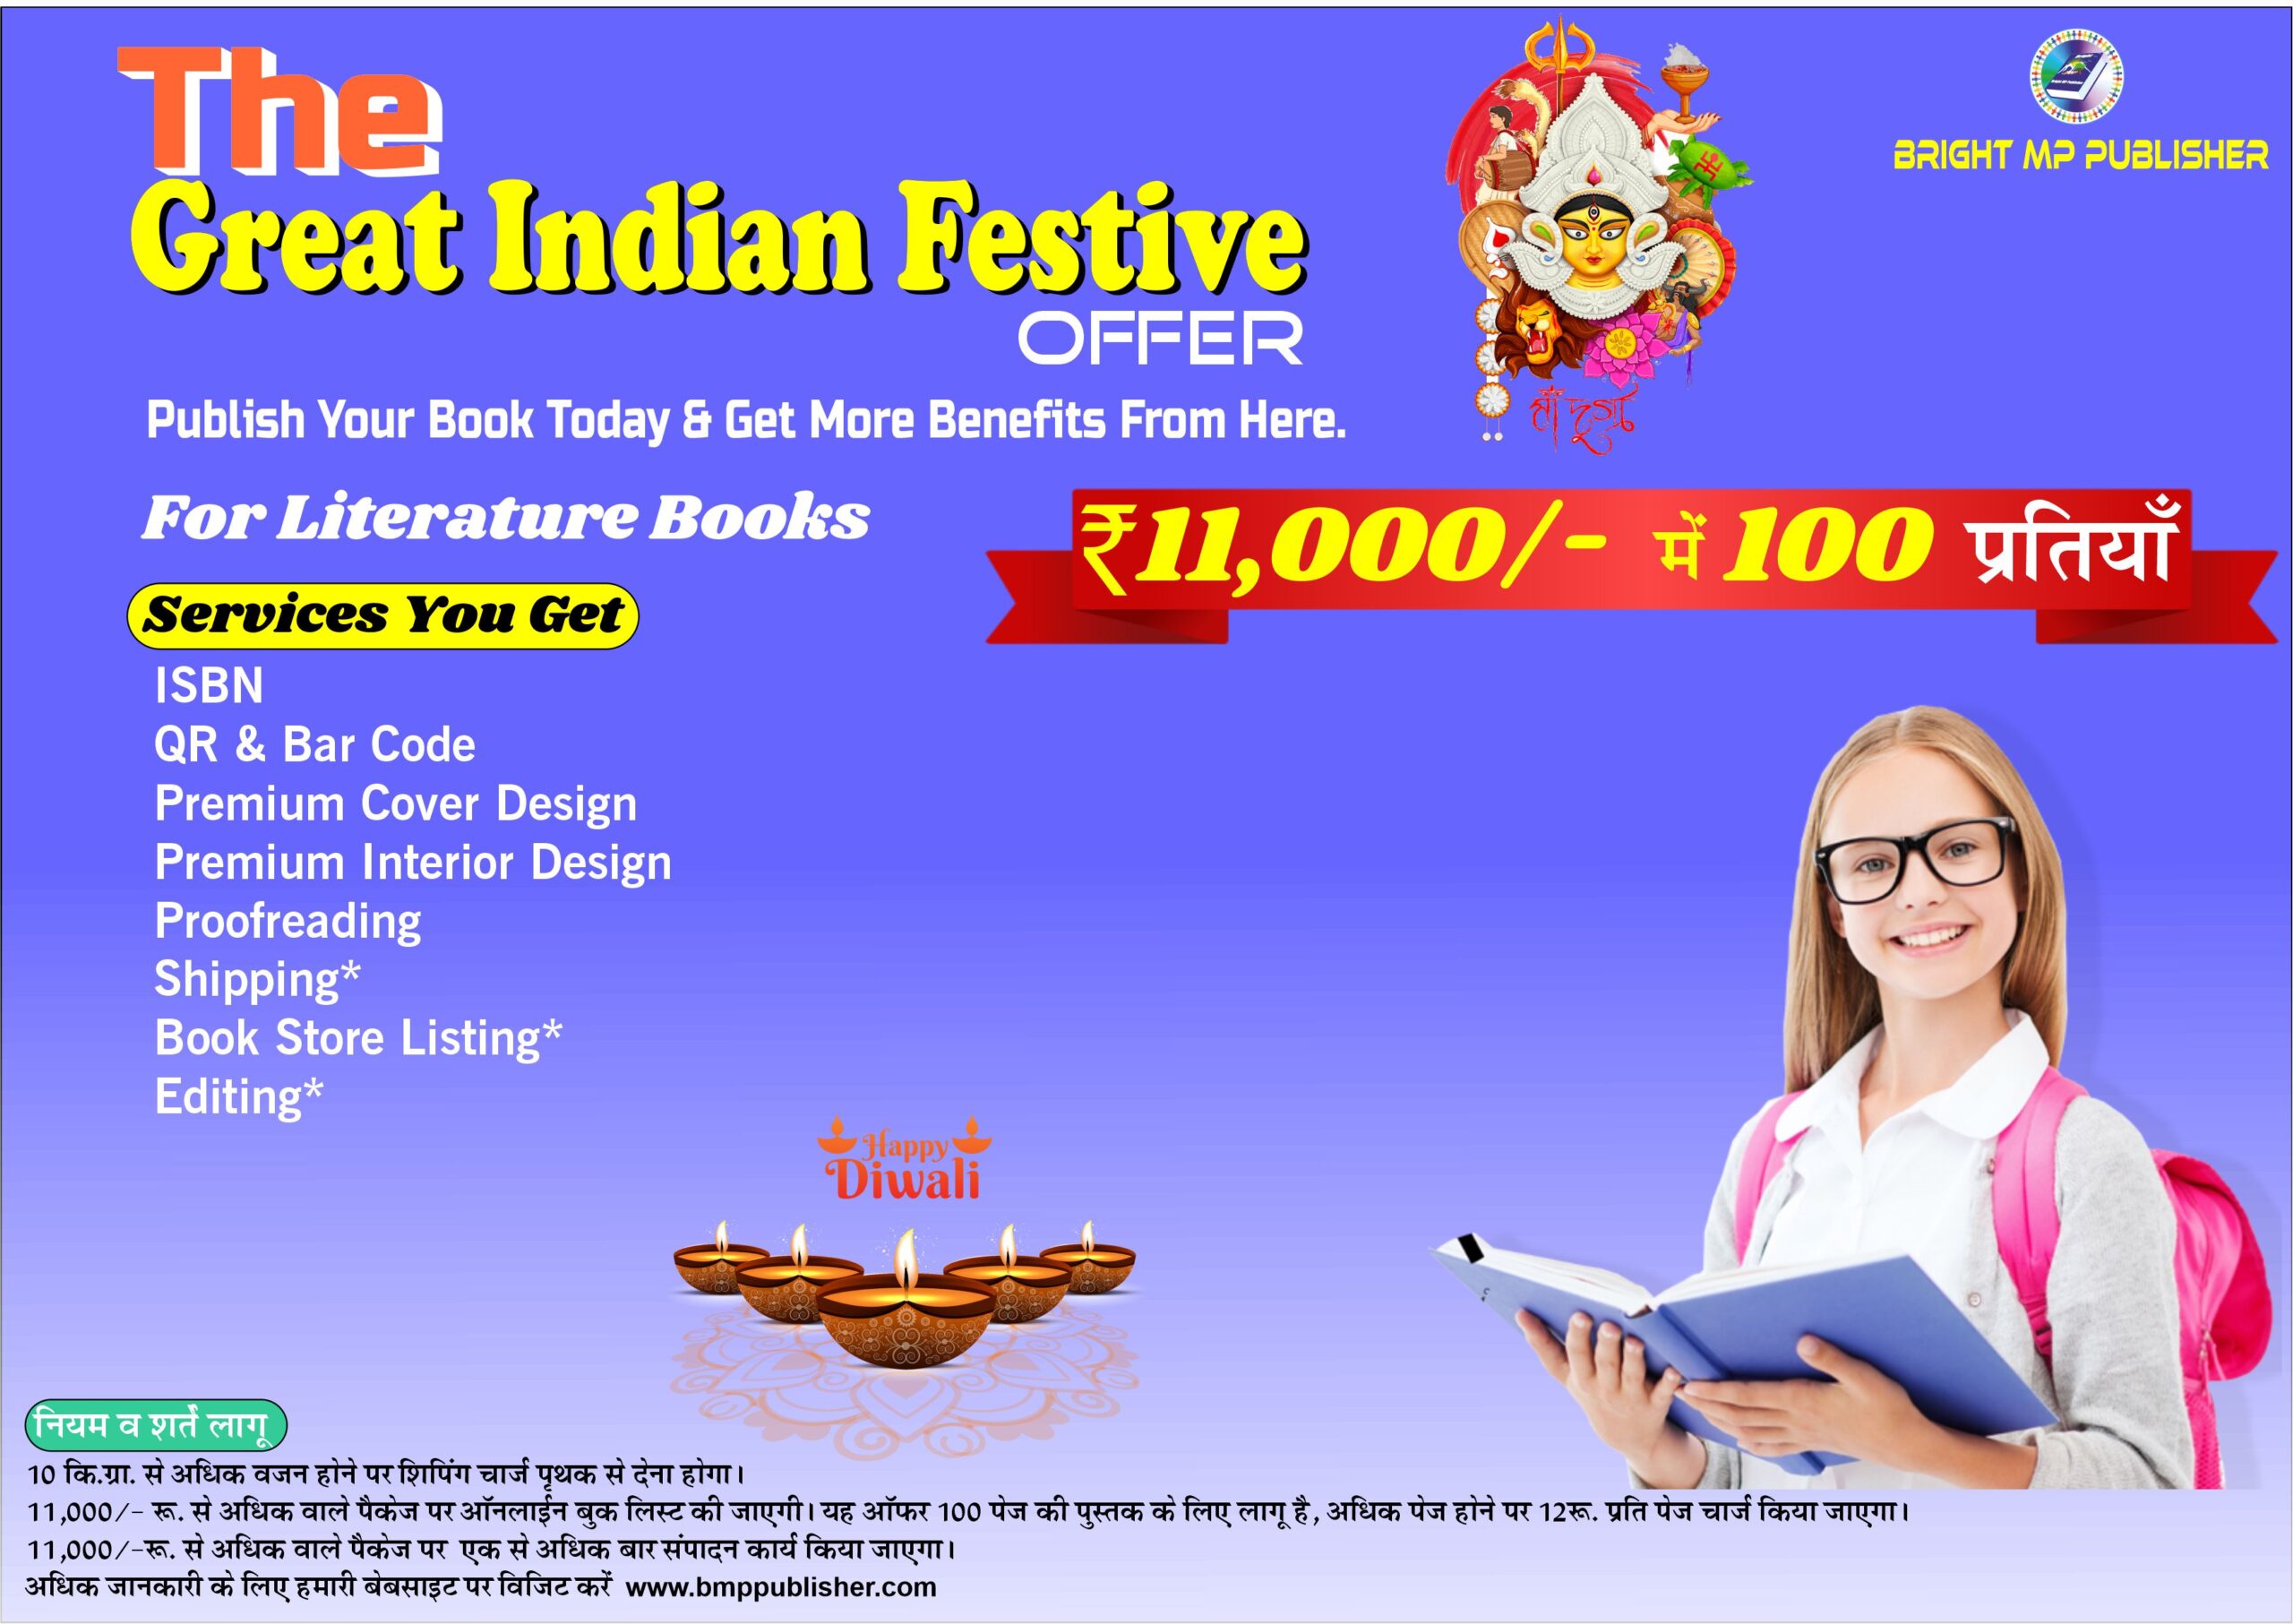 The Great Indian Festive Offer 2023